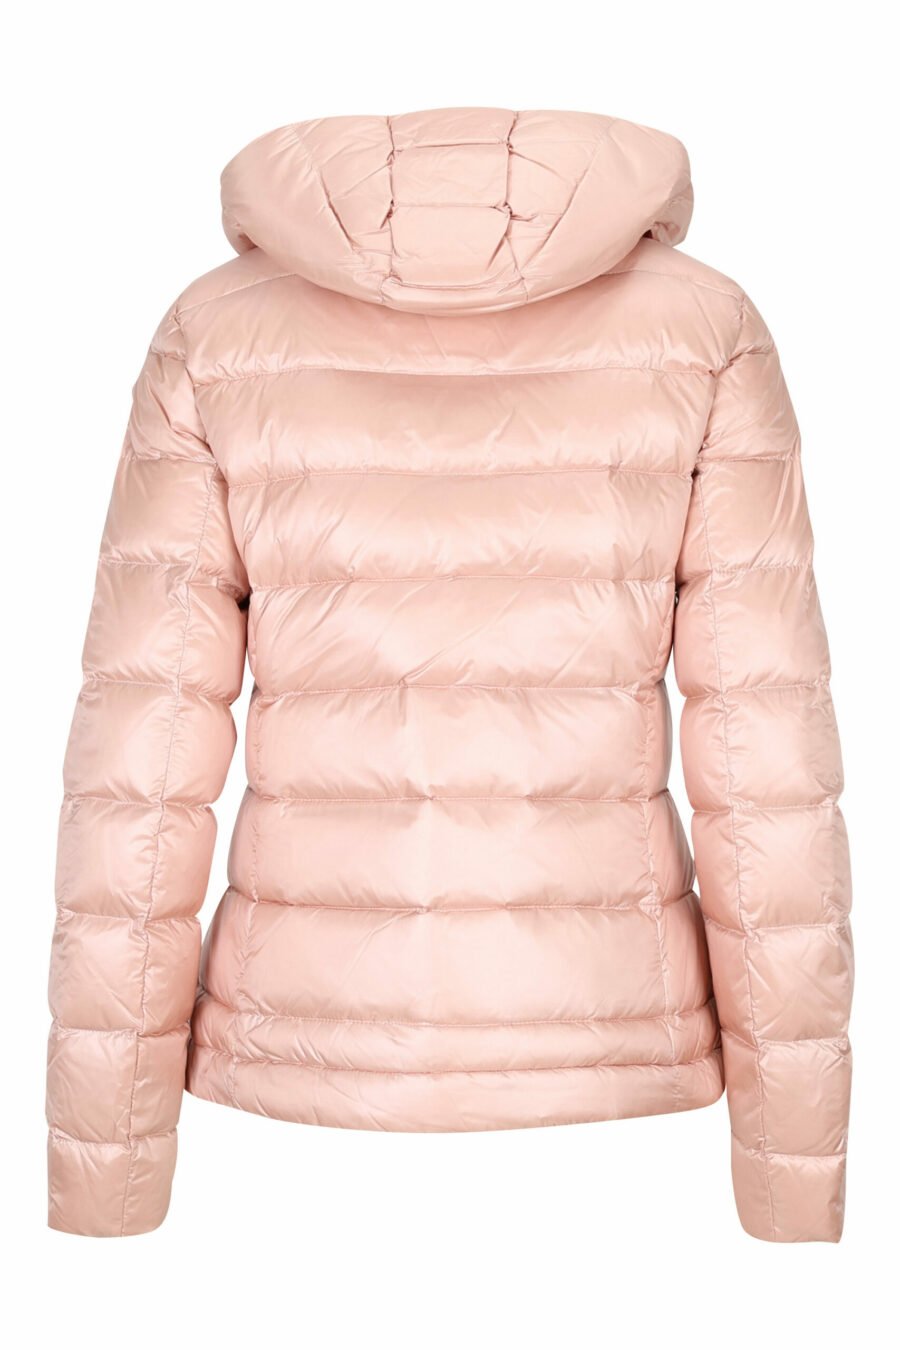 Pale pink hooded jacket with straight lines with purple inside and logo patch - 8058610673321 3 scaled